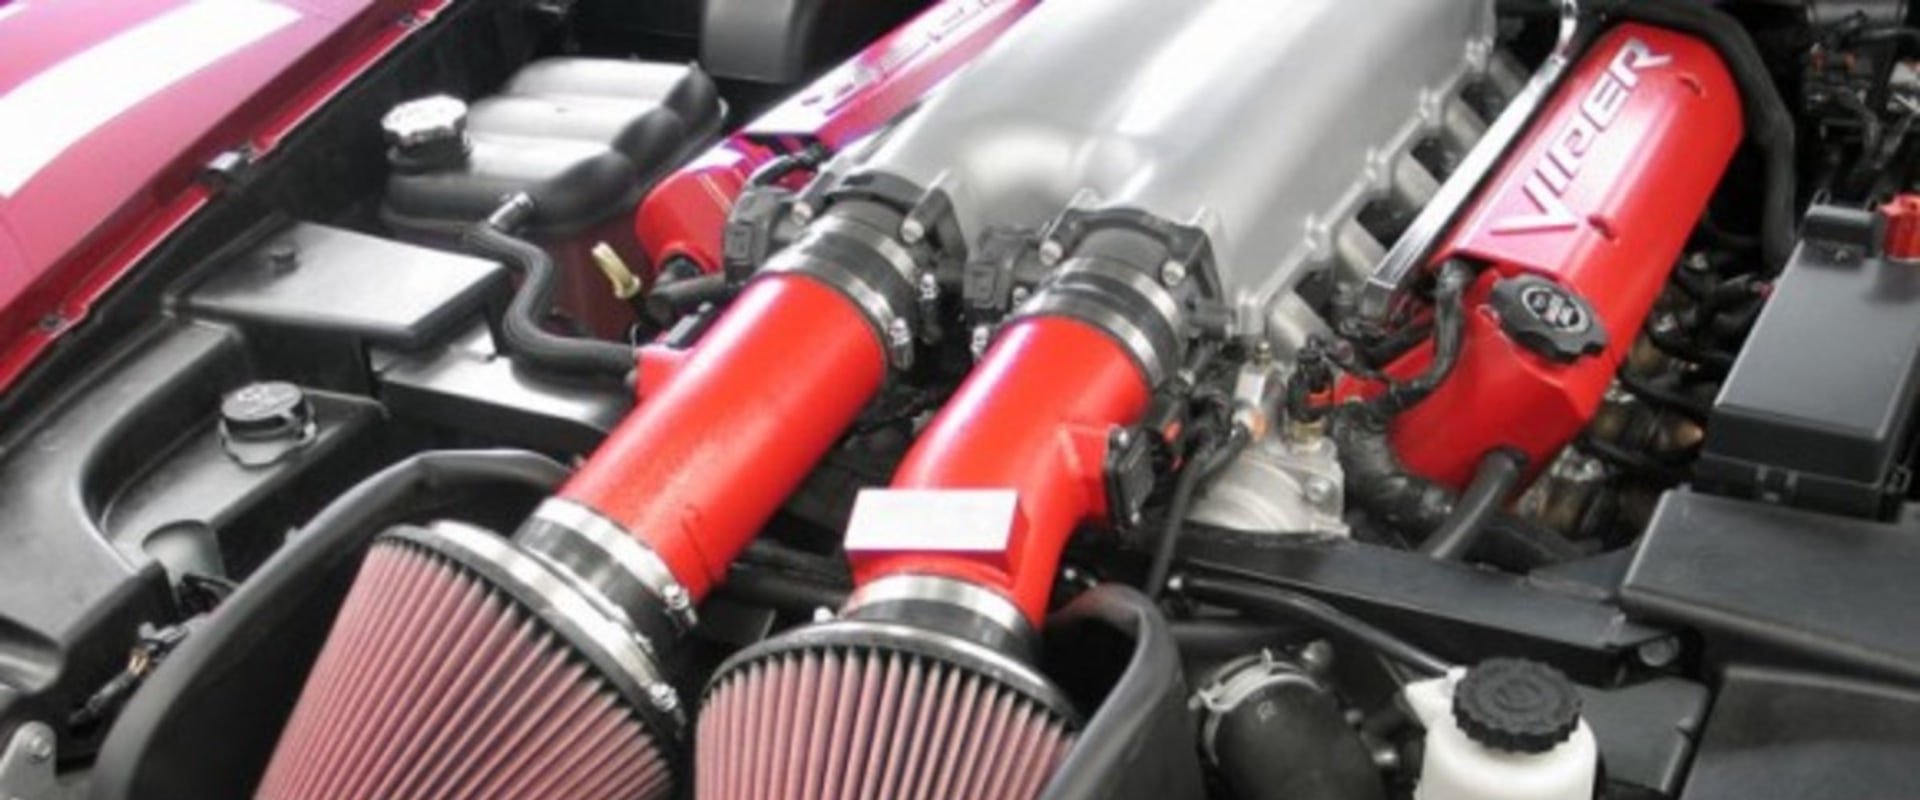 Does a bigger air filter mean more power?